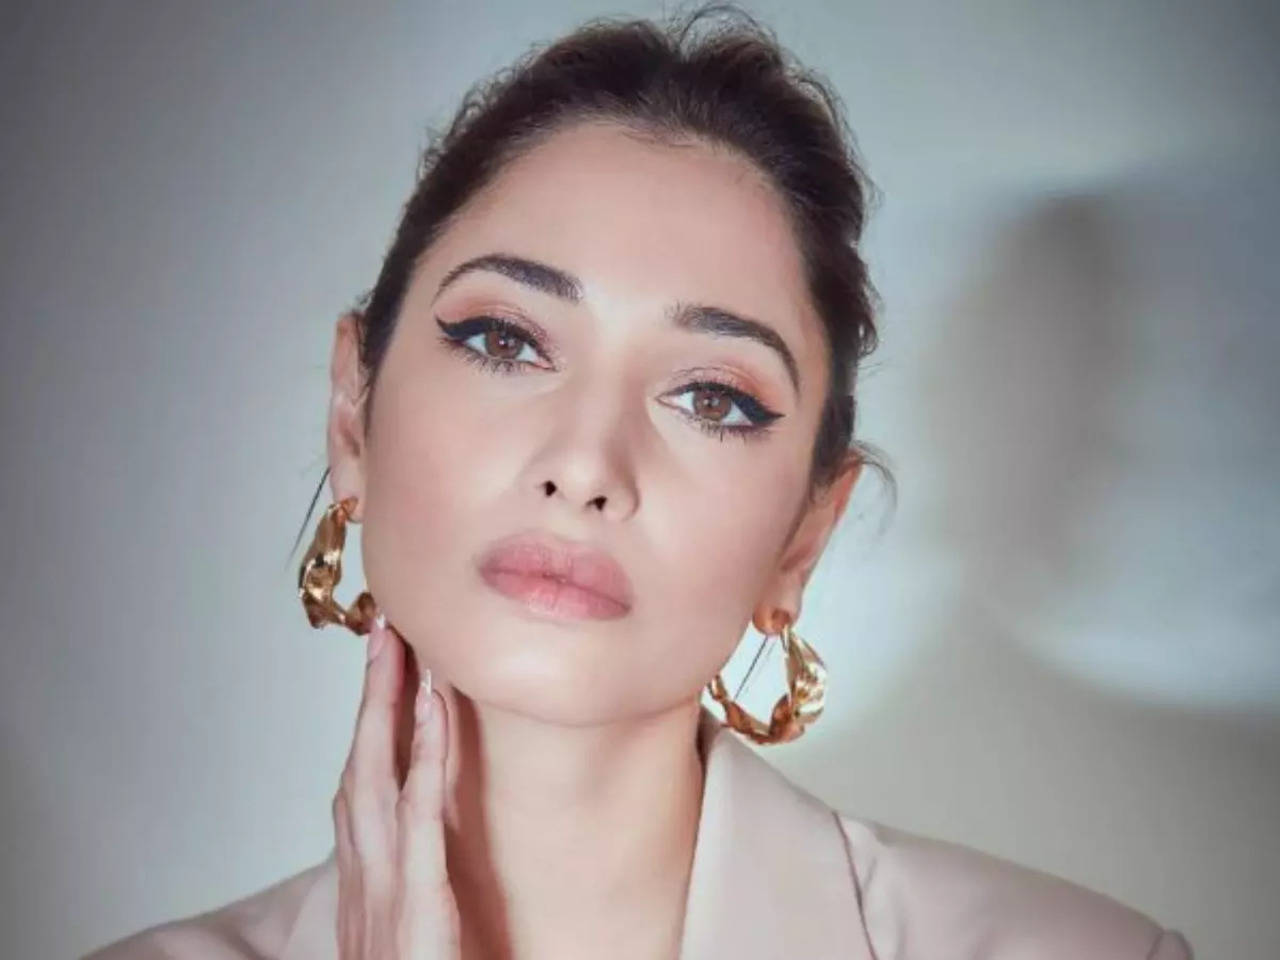 Tamannaah Bhatia just dropped her beauty routine